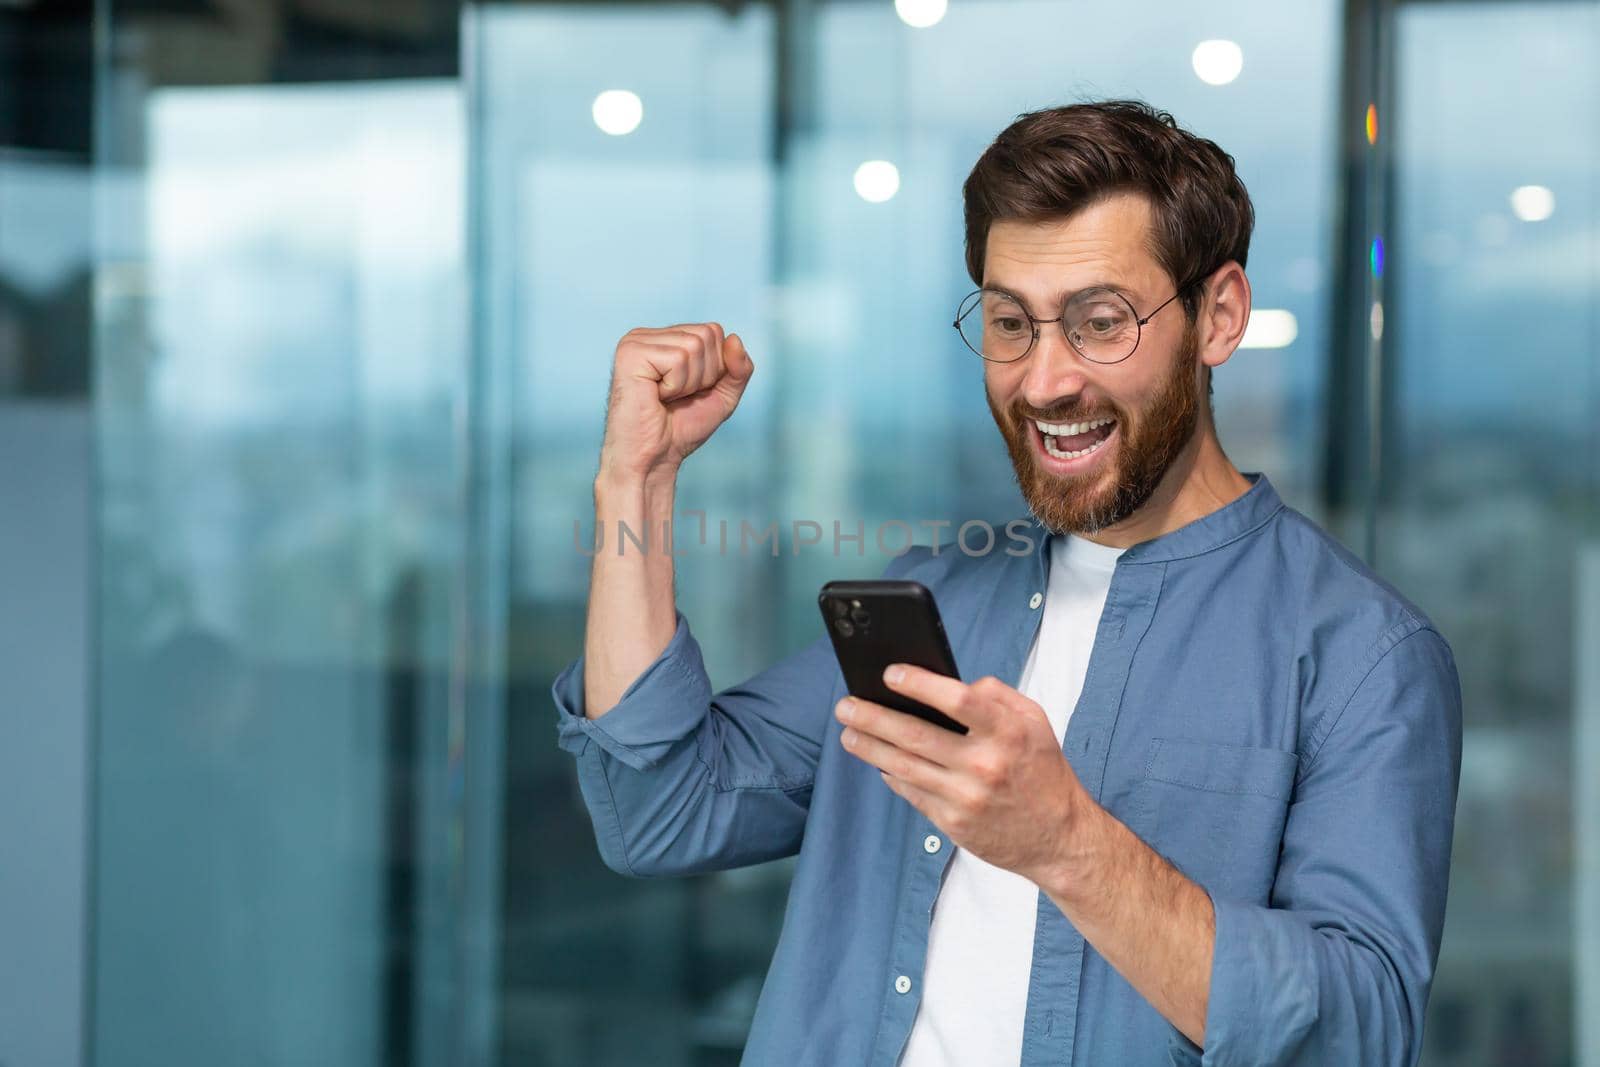 Successful businessman working in modern office building, man looking at smartphone and reading news celebrating happy news victory businessman in shirt and glasses holding hand up triumph gesture by voronaman